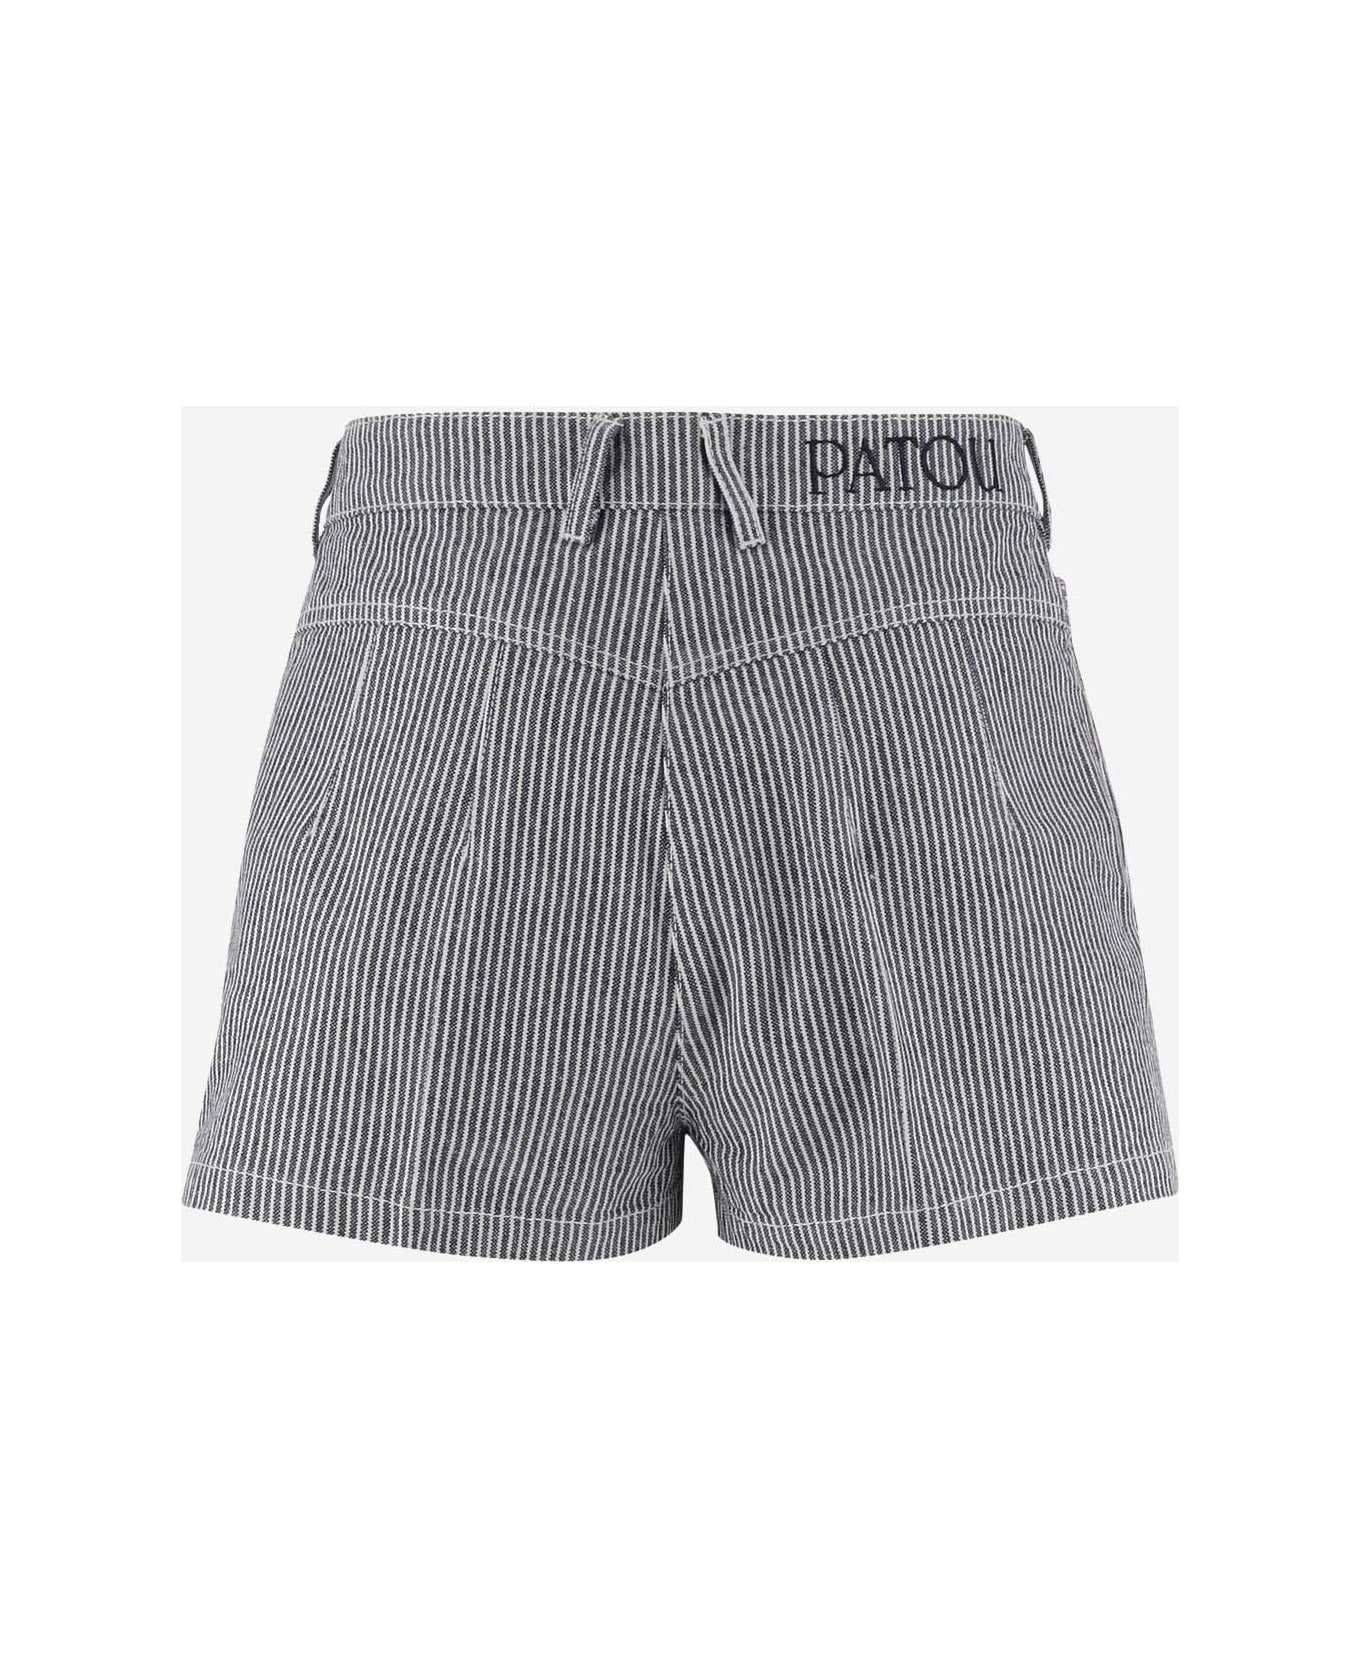 Patou Cotton Short Trousers With Striped Pattern - Navy Striped